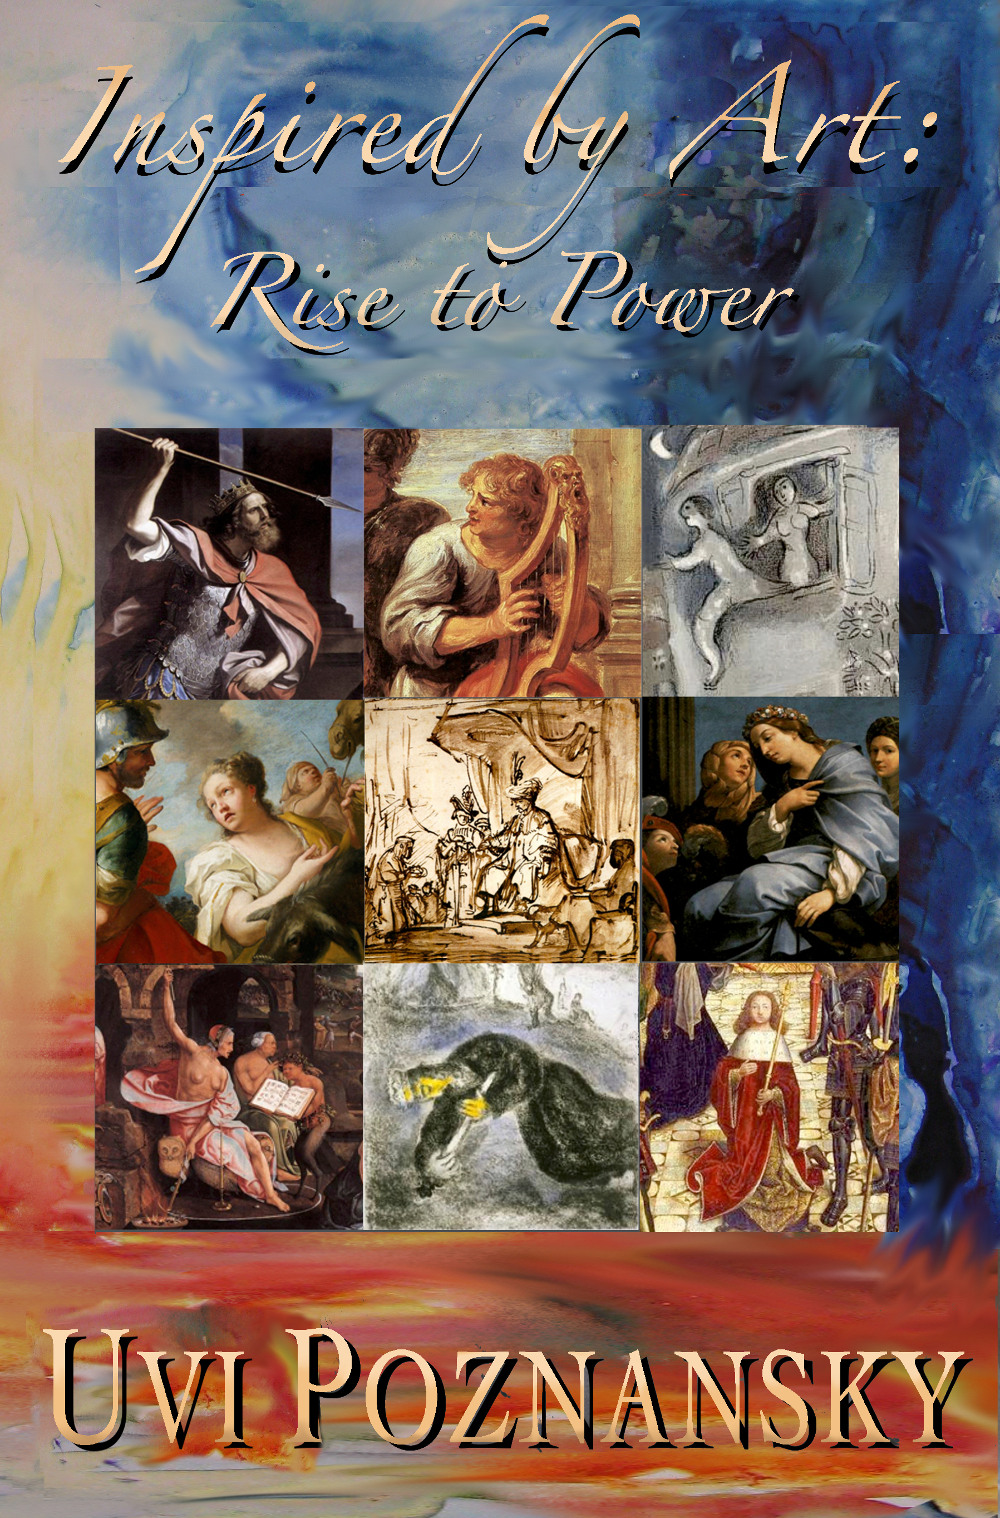 FREE: Inspired by Art: Rise to Power by Uvi Poznansky